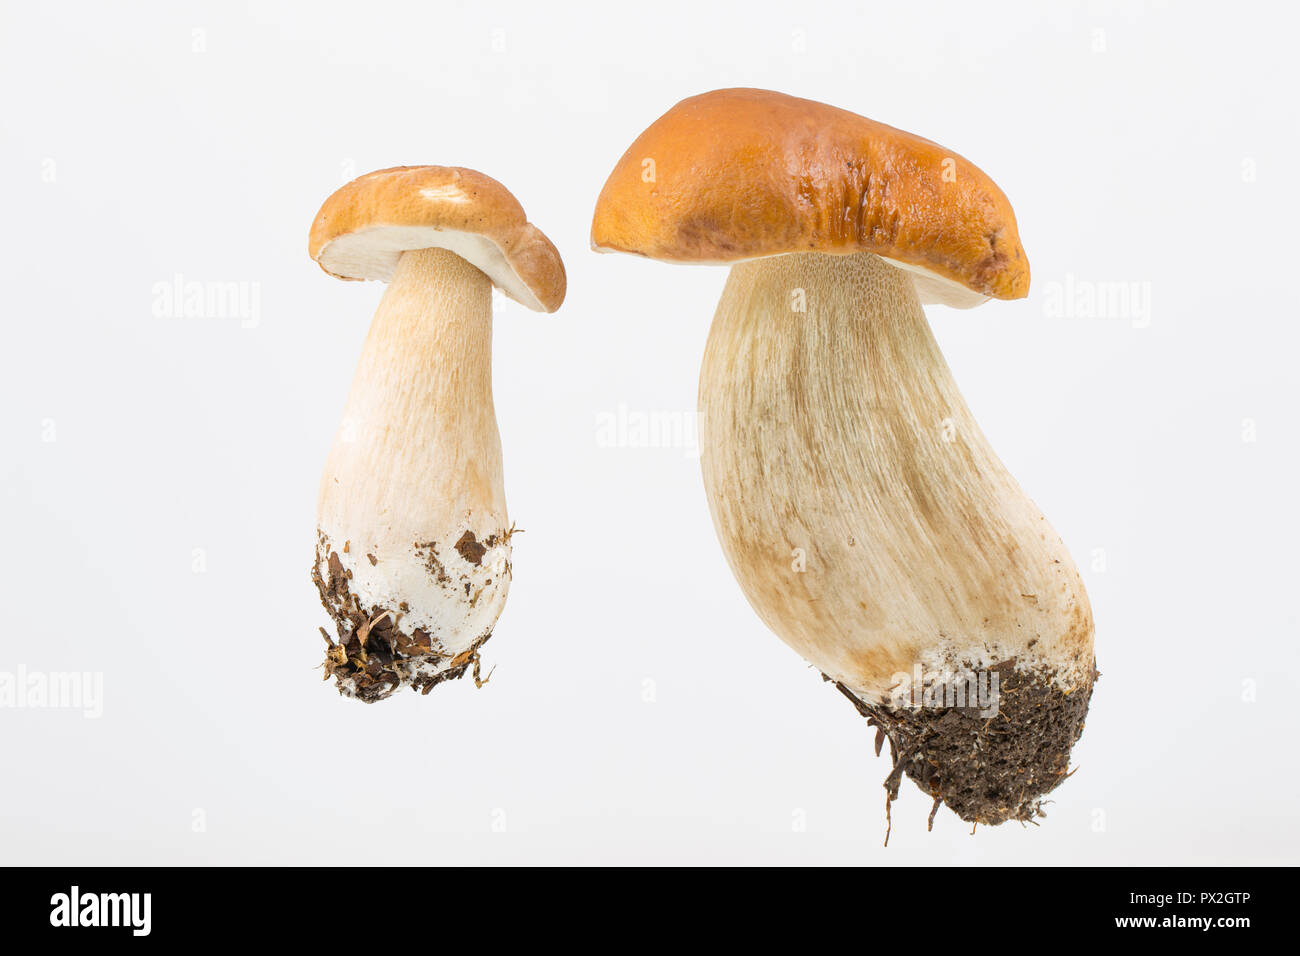 Two Boletus edulis mushrooms photographed on a white background. These mushrooms are also known as ceps, penny buns or porcini. Dorset England UK GB Stock Photo